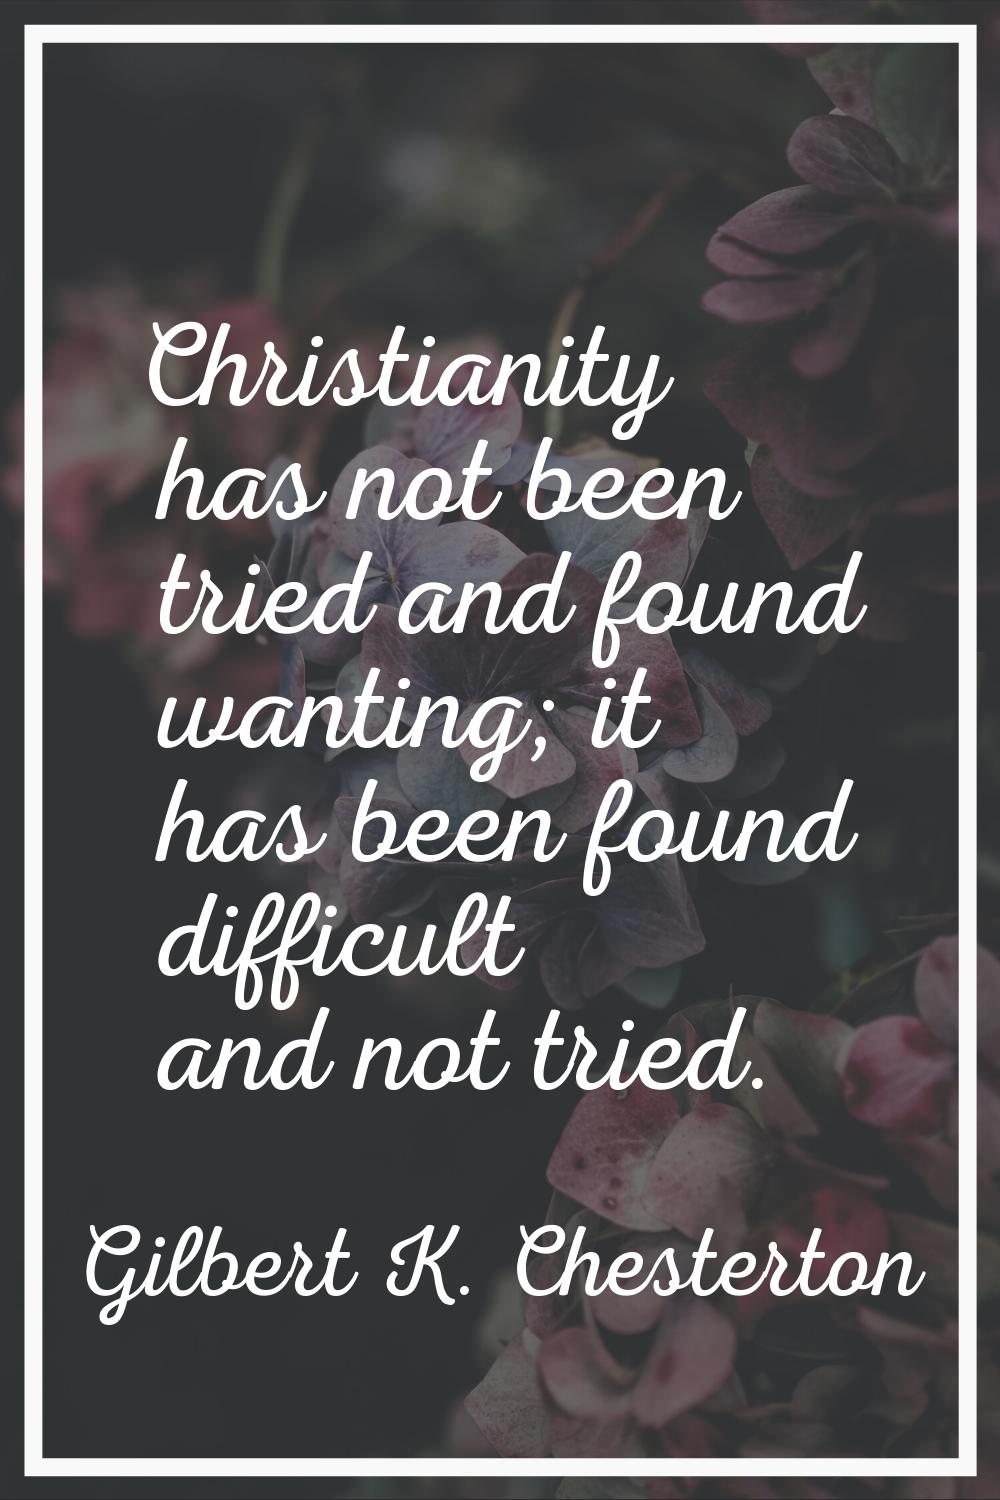 Christianity has not been tried and found wanting; it has been found difficult and not tried.